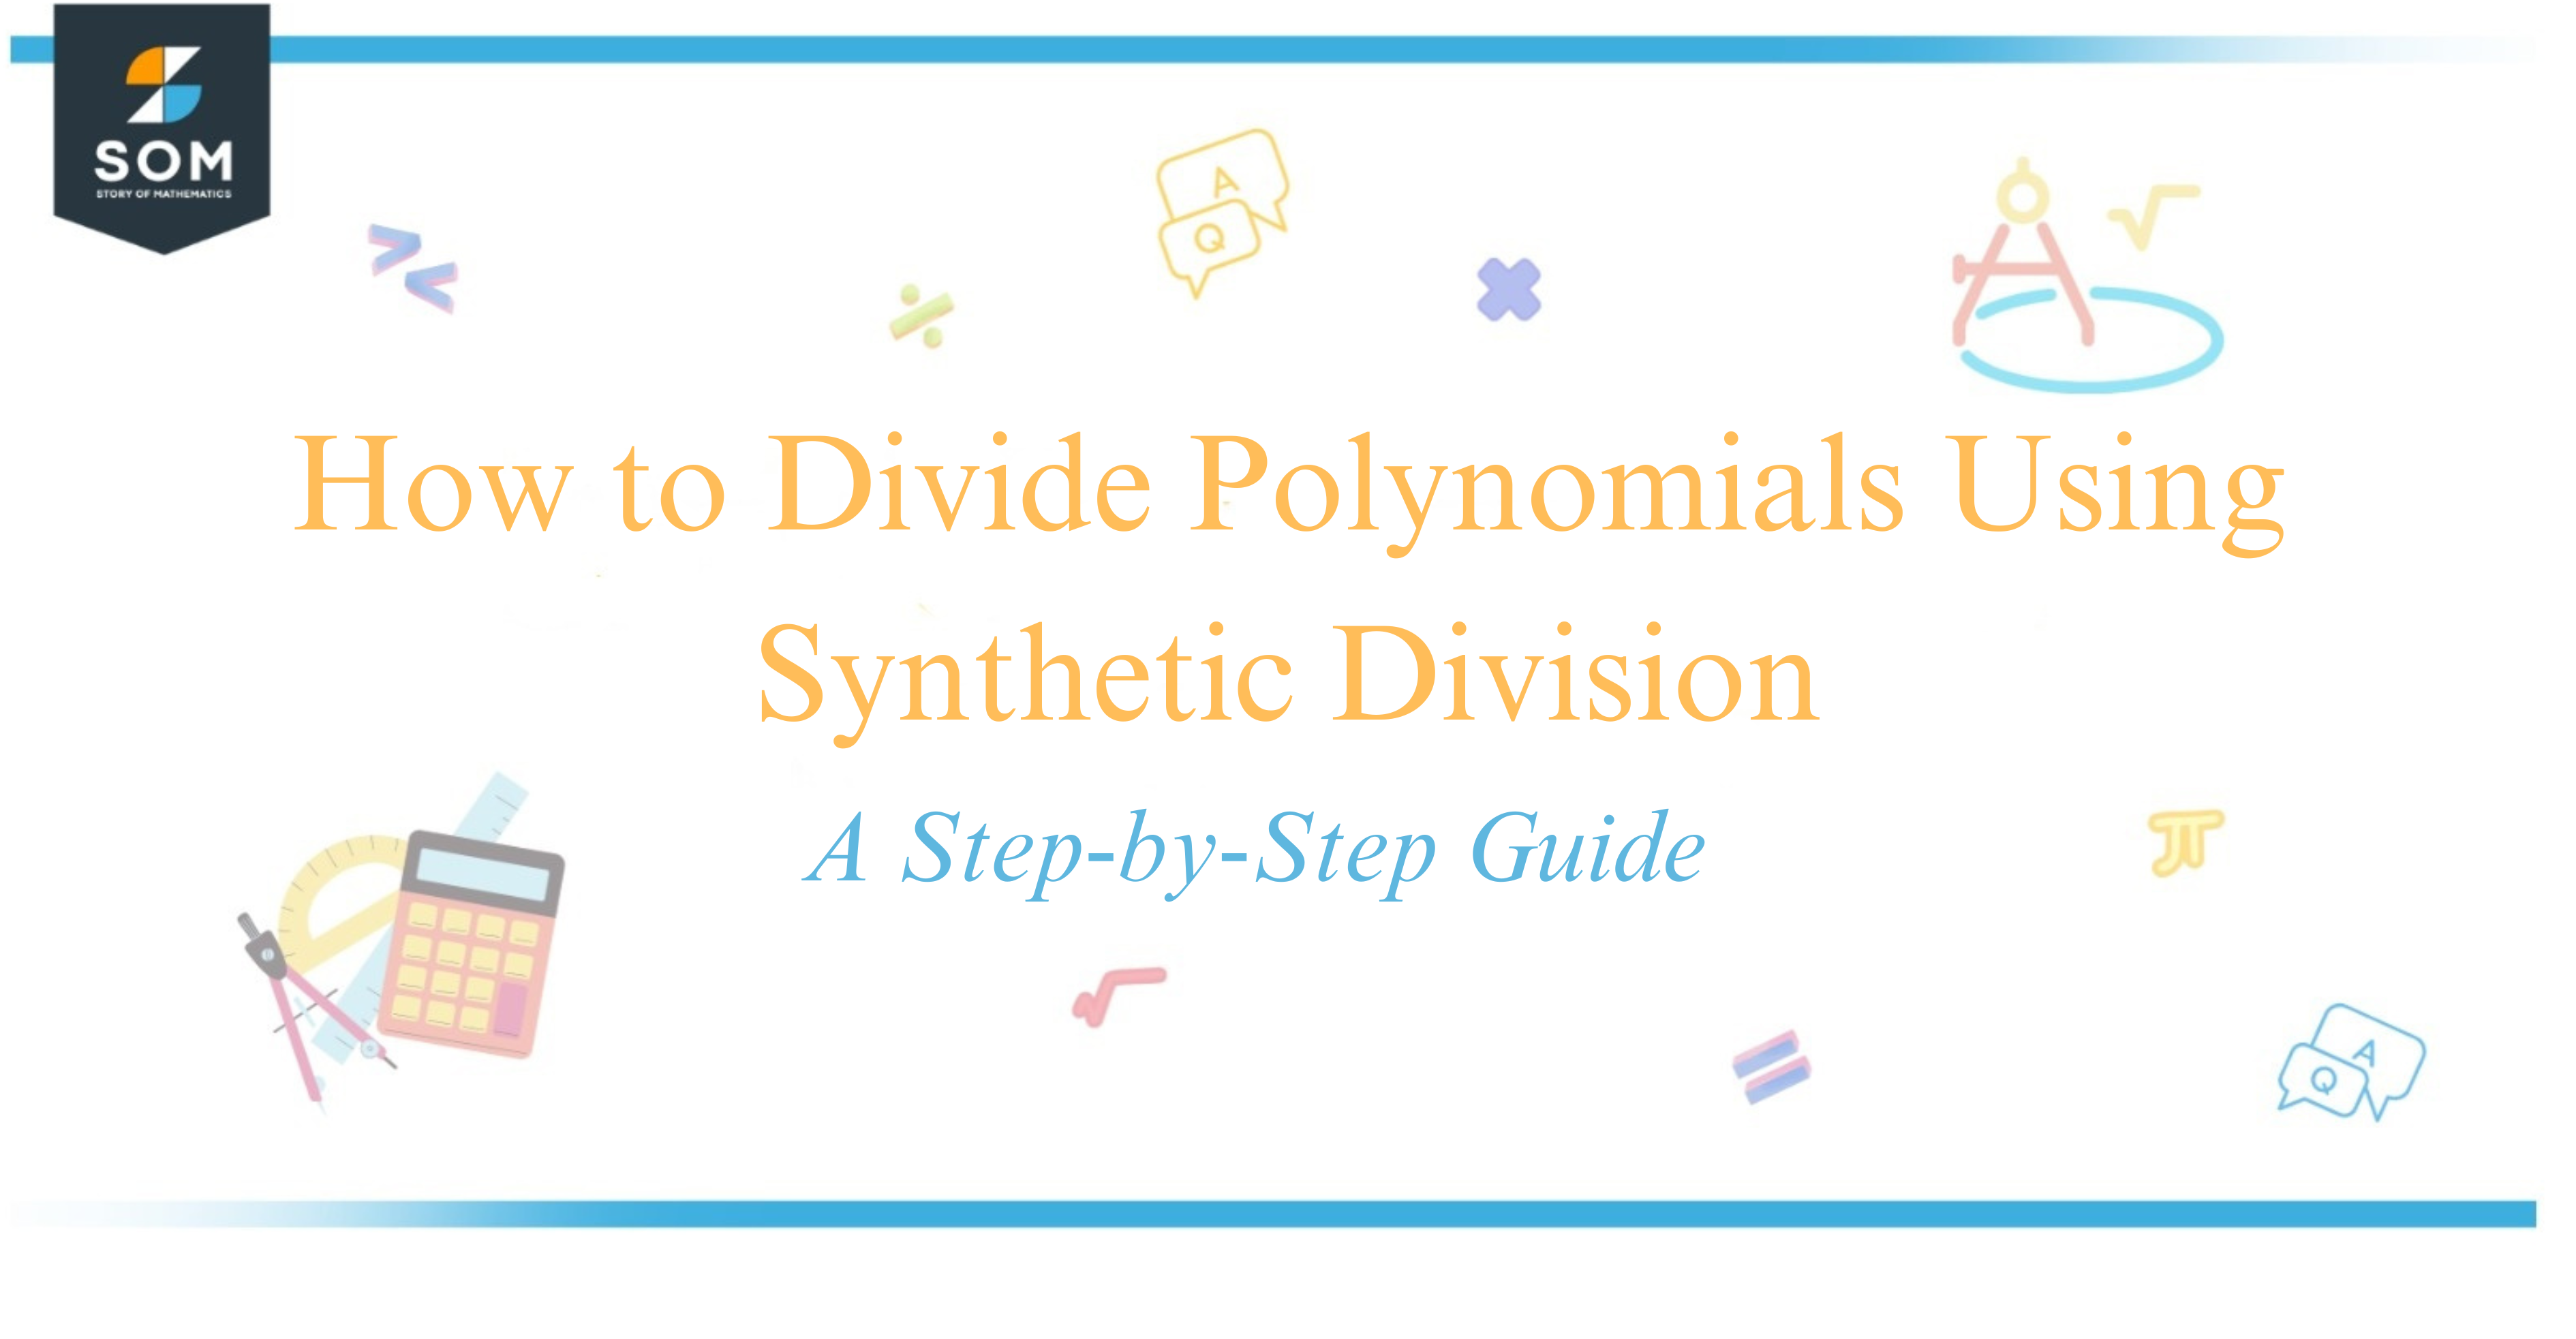 How to Divide Polynomials Using Synthetic Division A Step-by-Step Guide